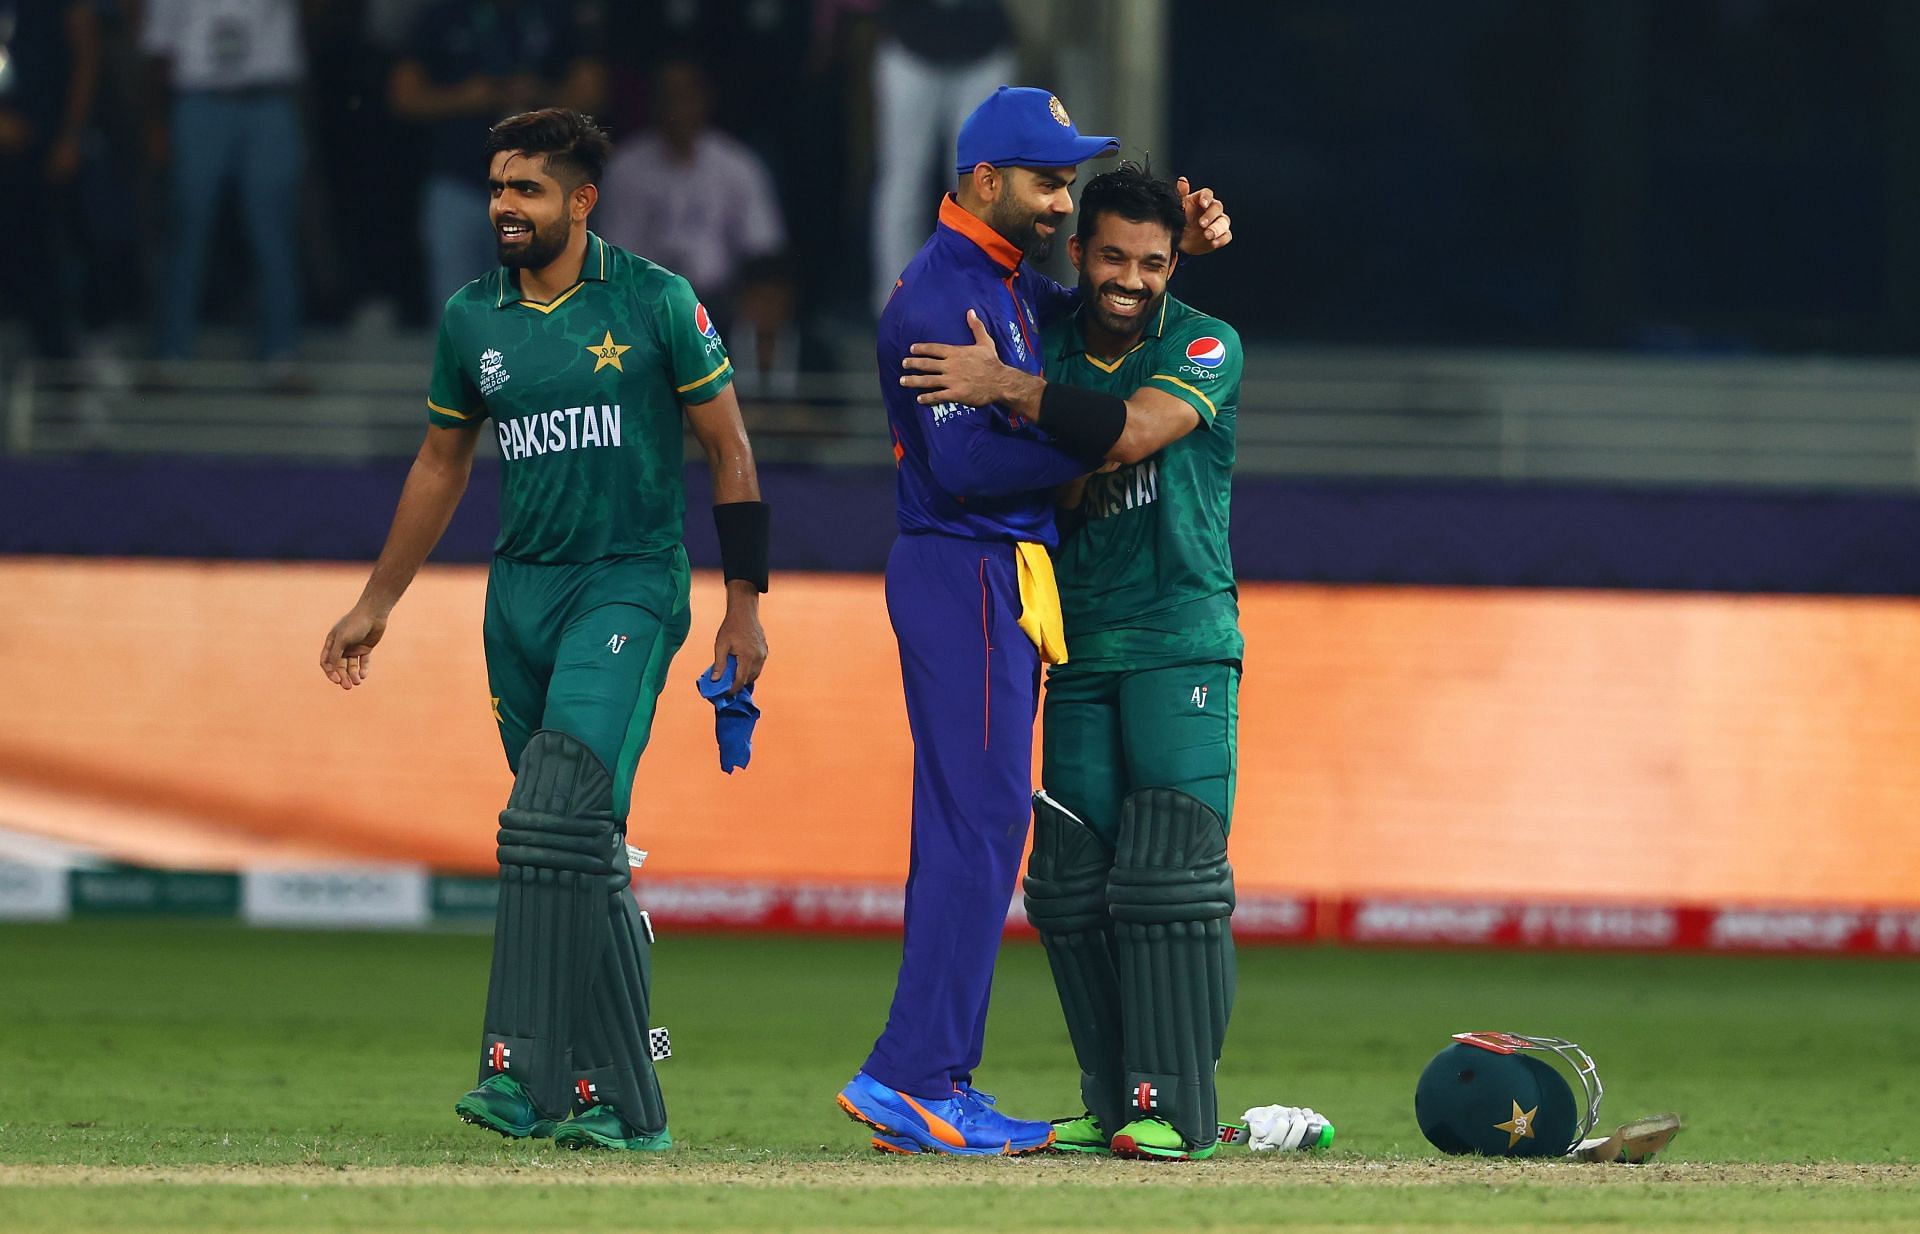 Pakistan registered a resounding win against Team India